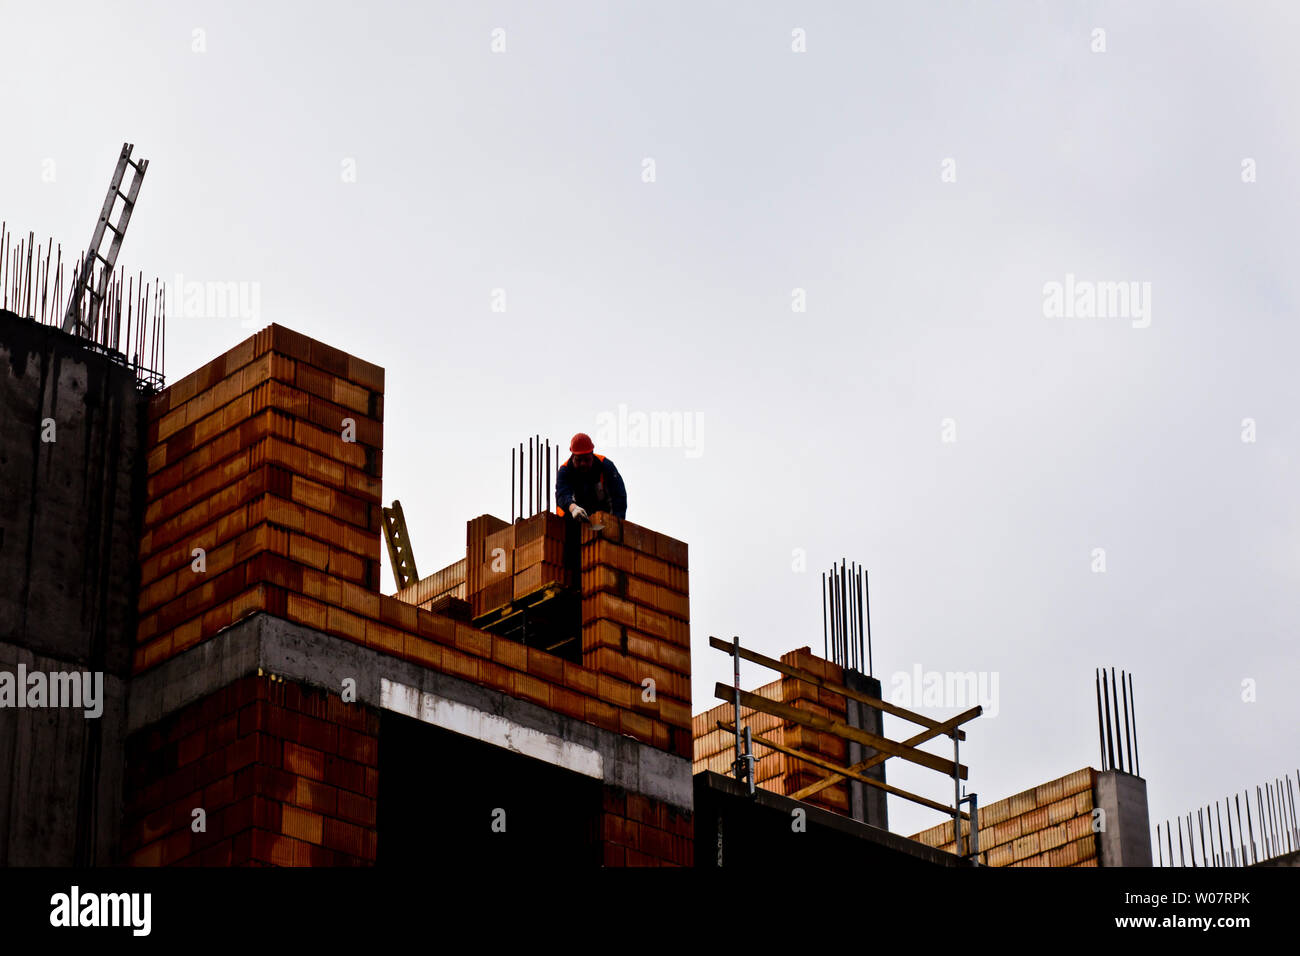 construction laborer at a construction site, working on the wall of a multi-storey residential building Stock Photo